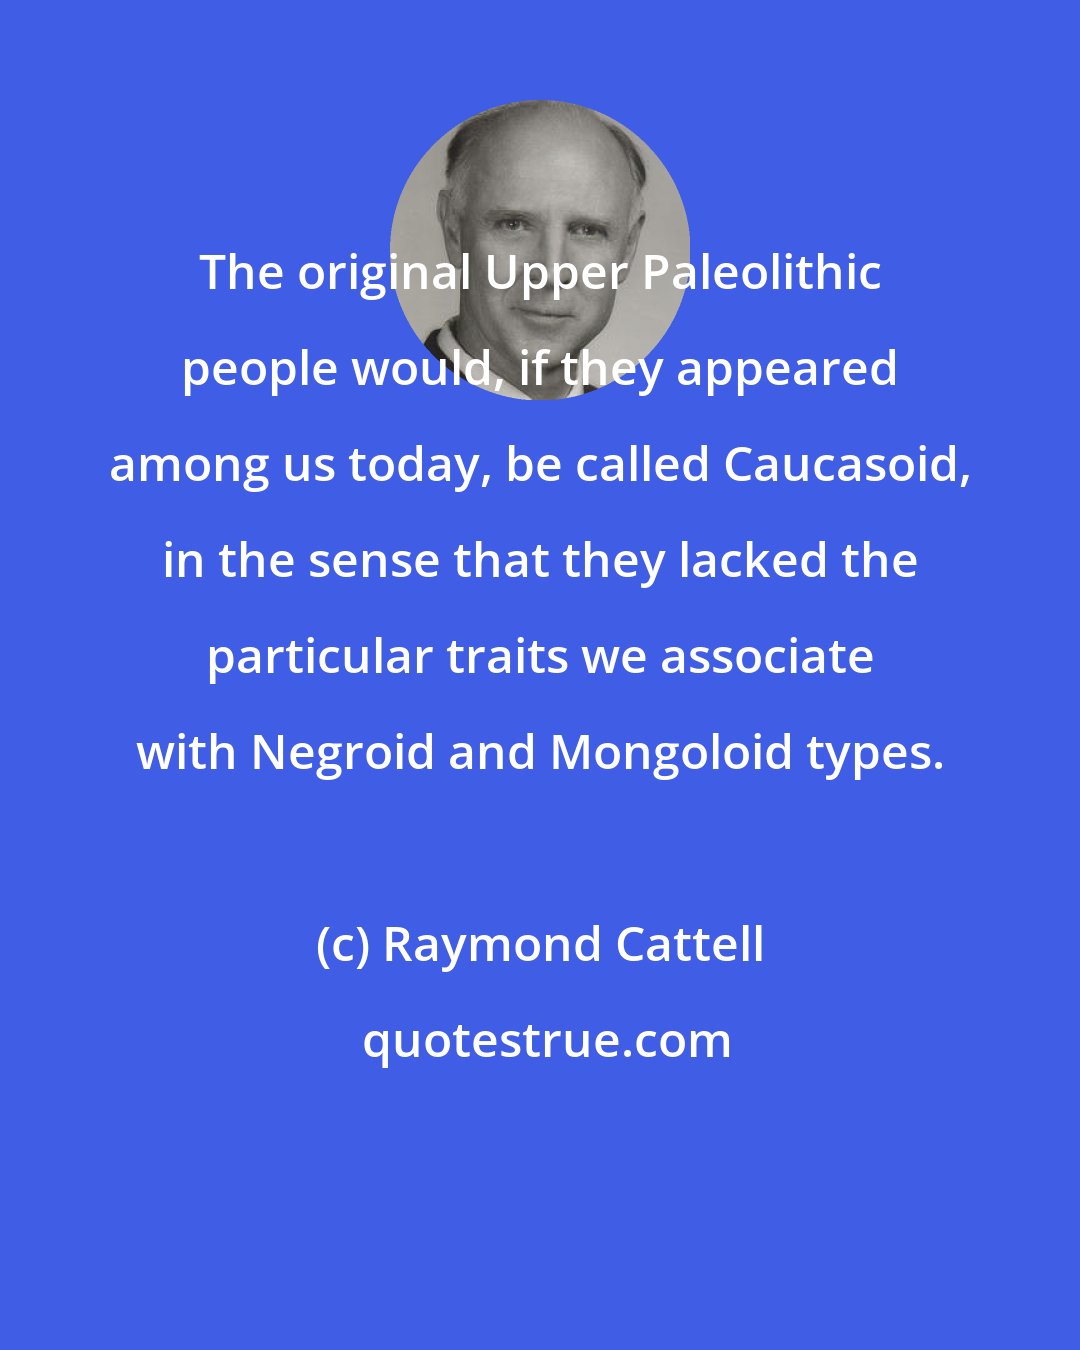 Raymond Cattell: The original Upper Paleolithic people would, if they appeared among us today, be called Caucasoid, in the sense that they lacked the particular traits we associate with Negroid and Mongoloid types.